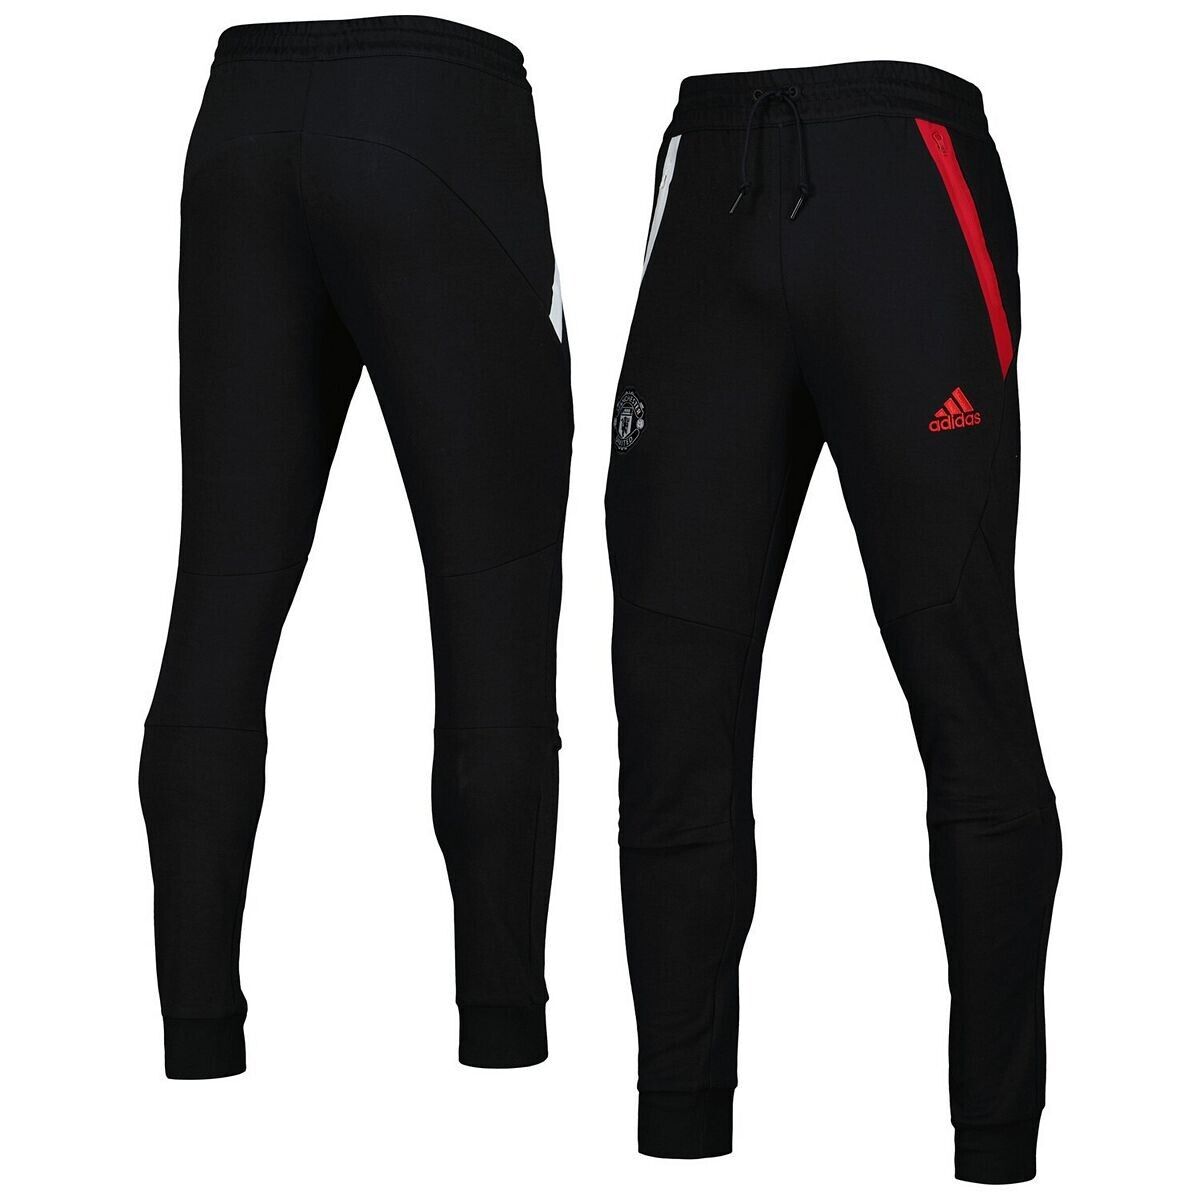 Adidas Men's Manchester United Travel Pant - Black/Red  L